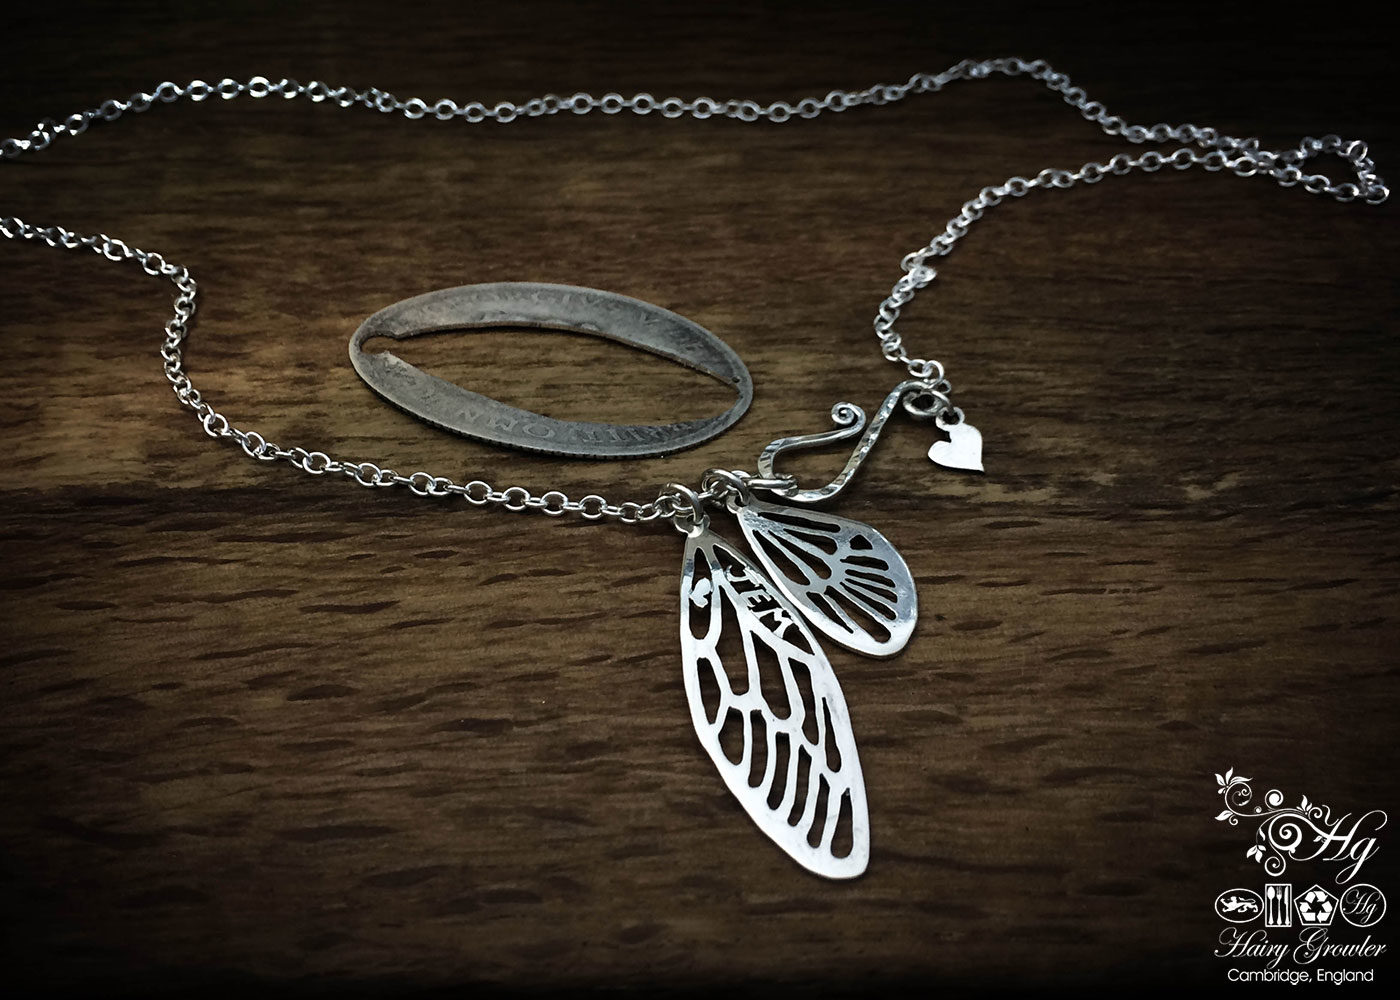 Handmade, recycled, sterling silver fairy faerie wings necklace being handmade